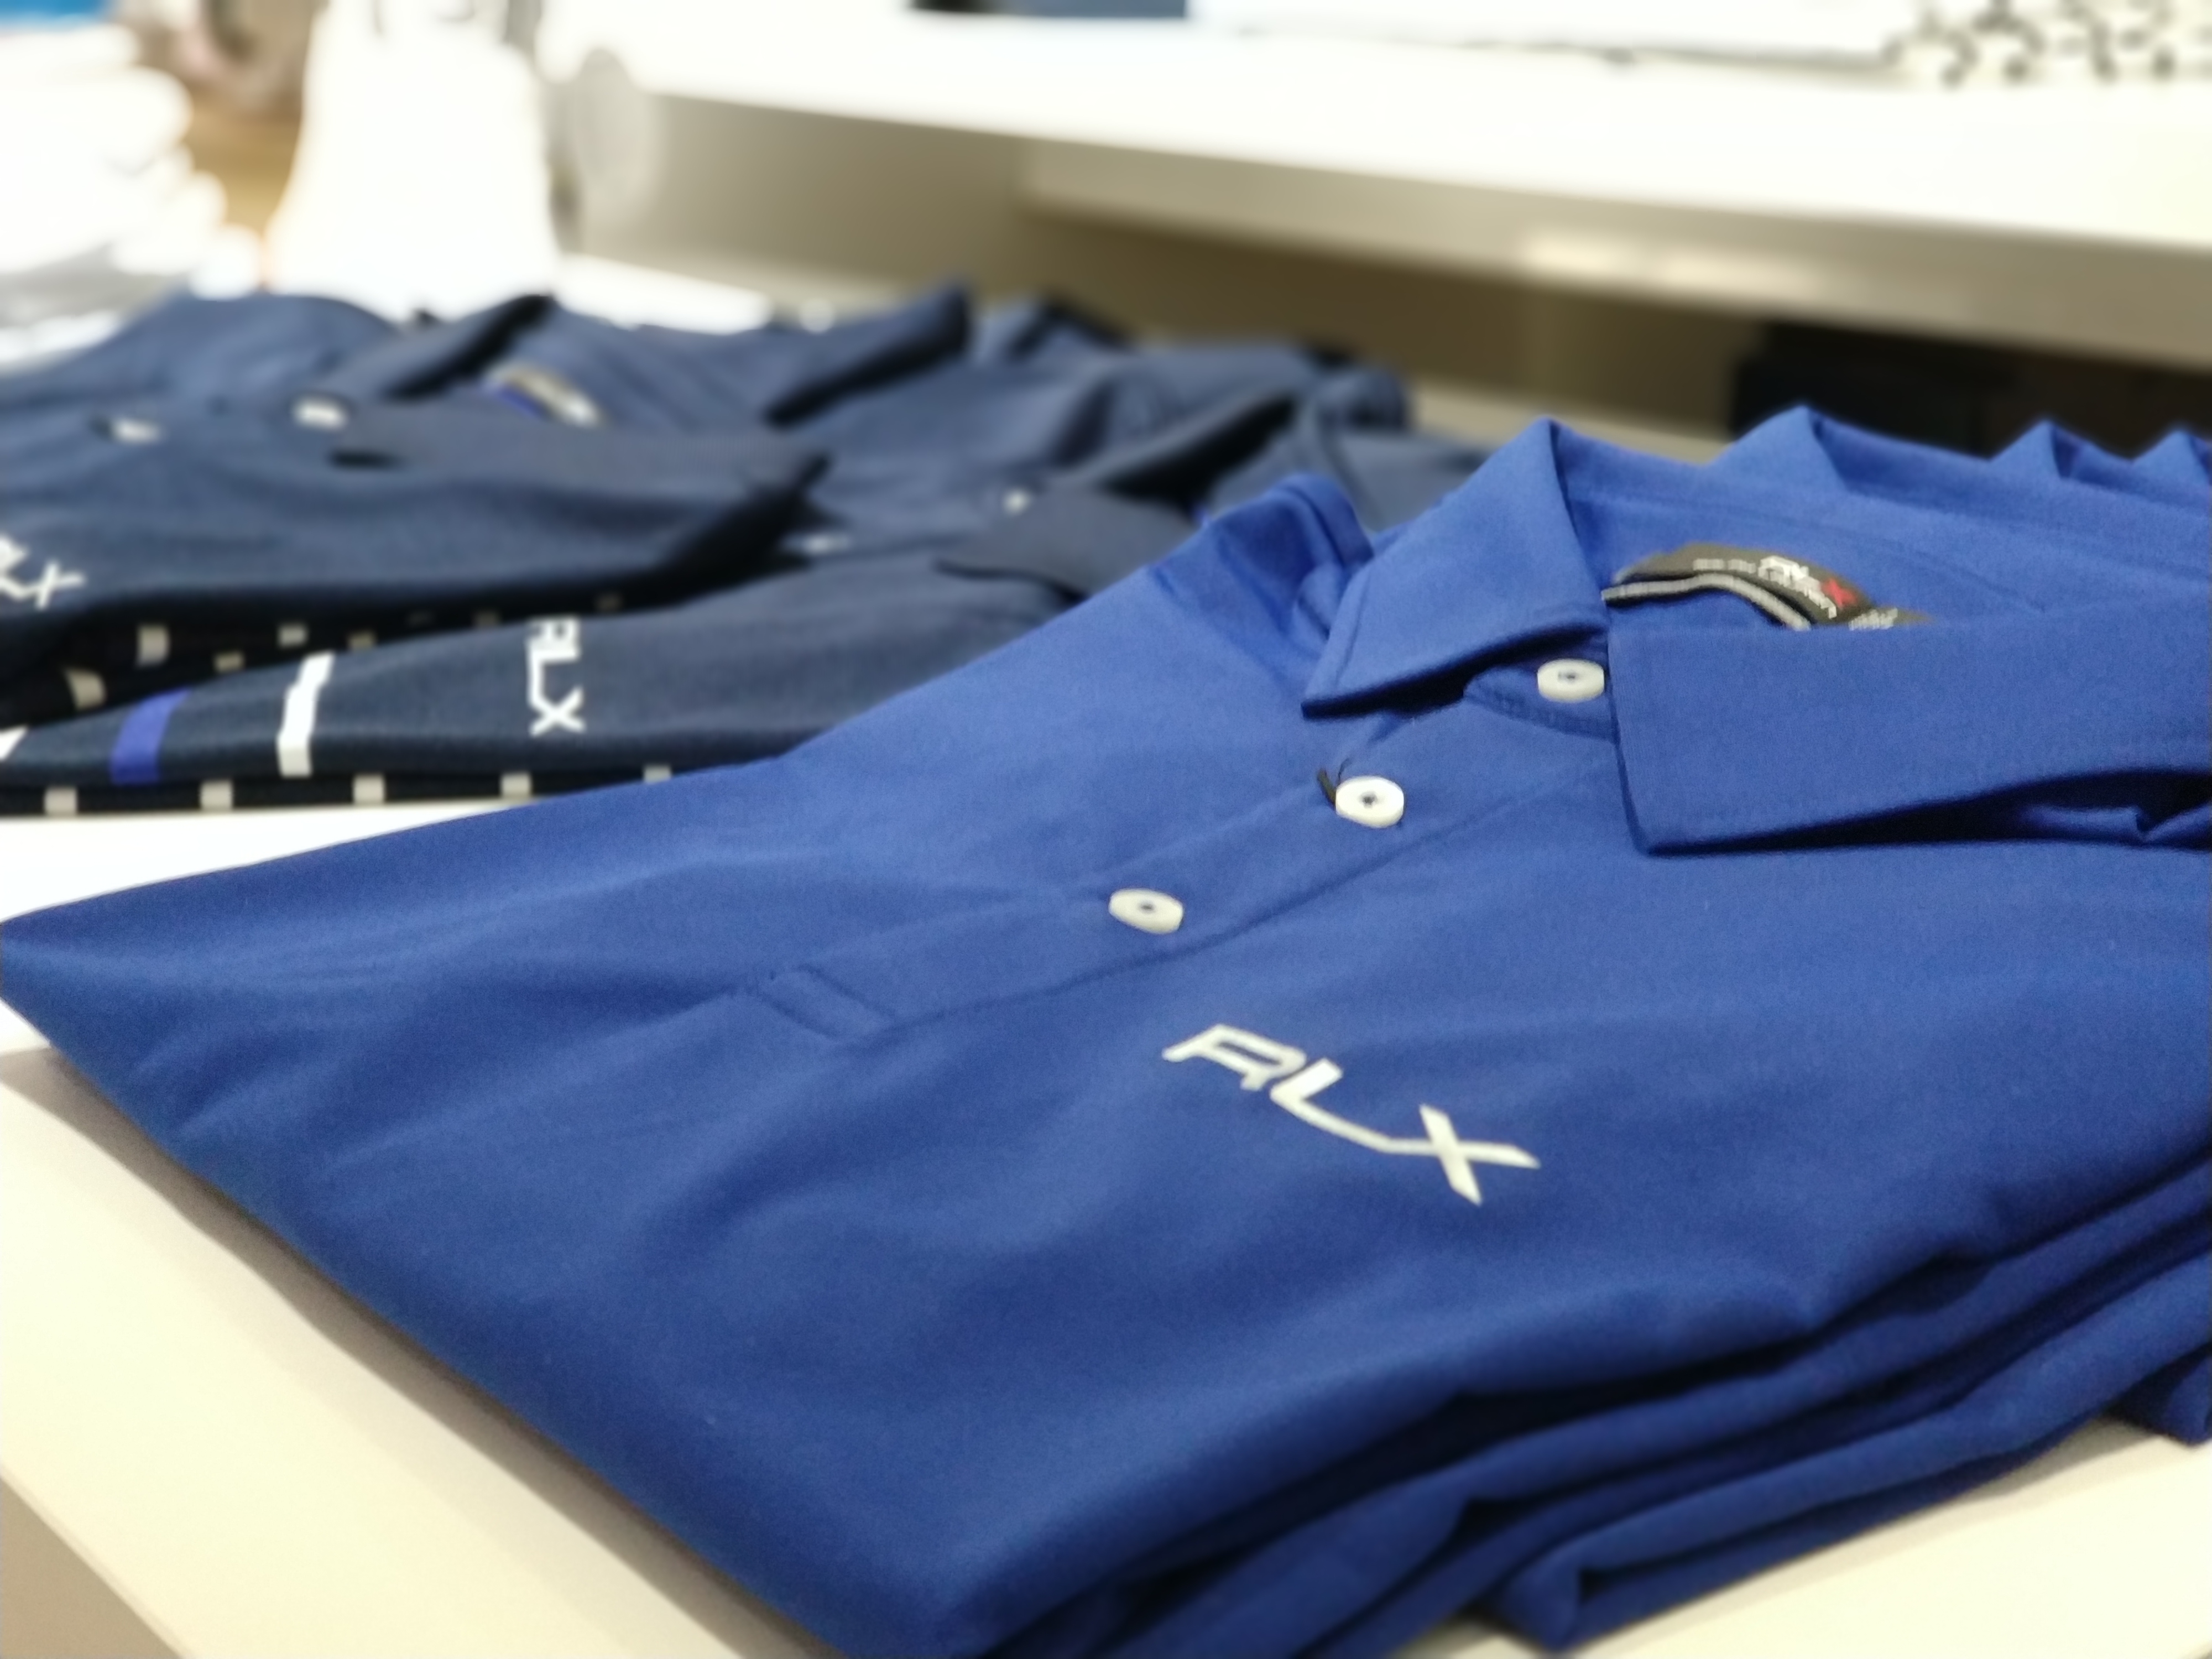 The new collection of Polo Ralph Lauren has arrived to Chaparral.